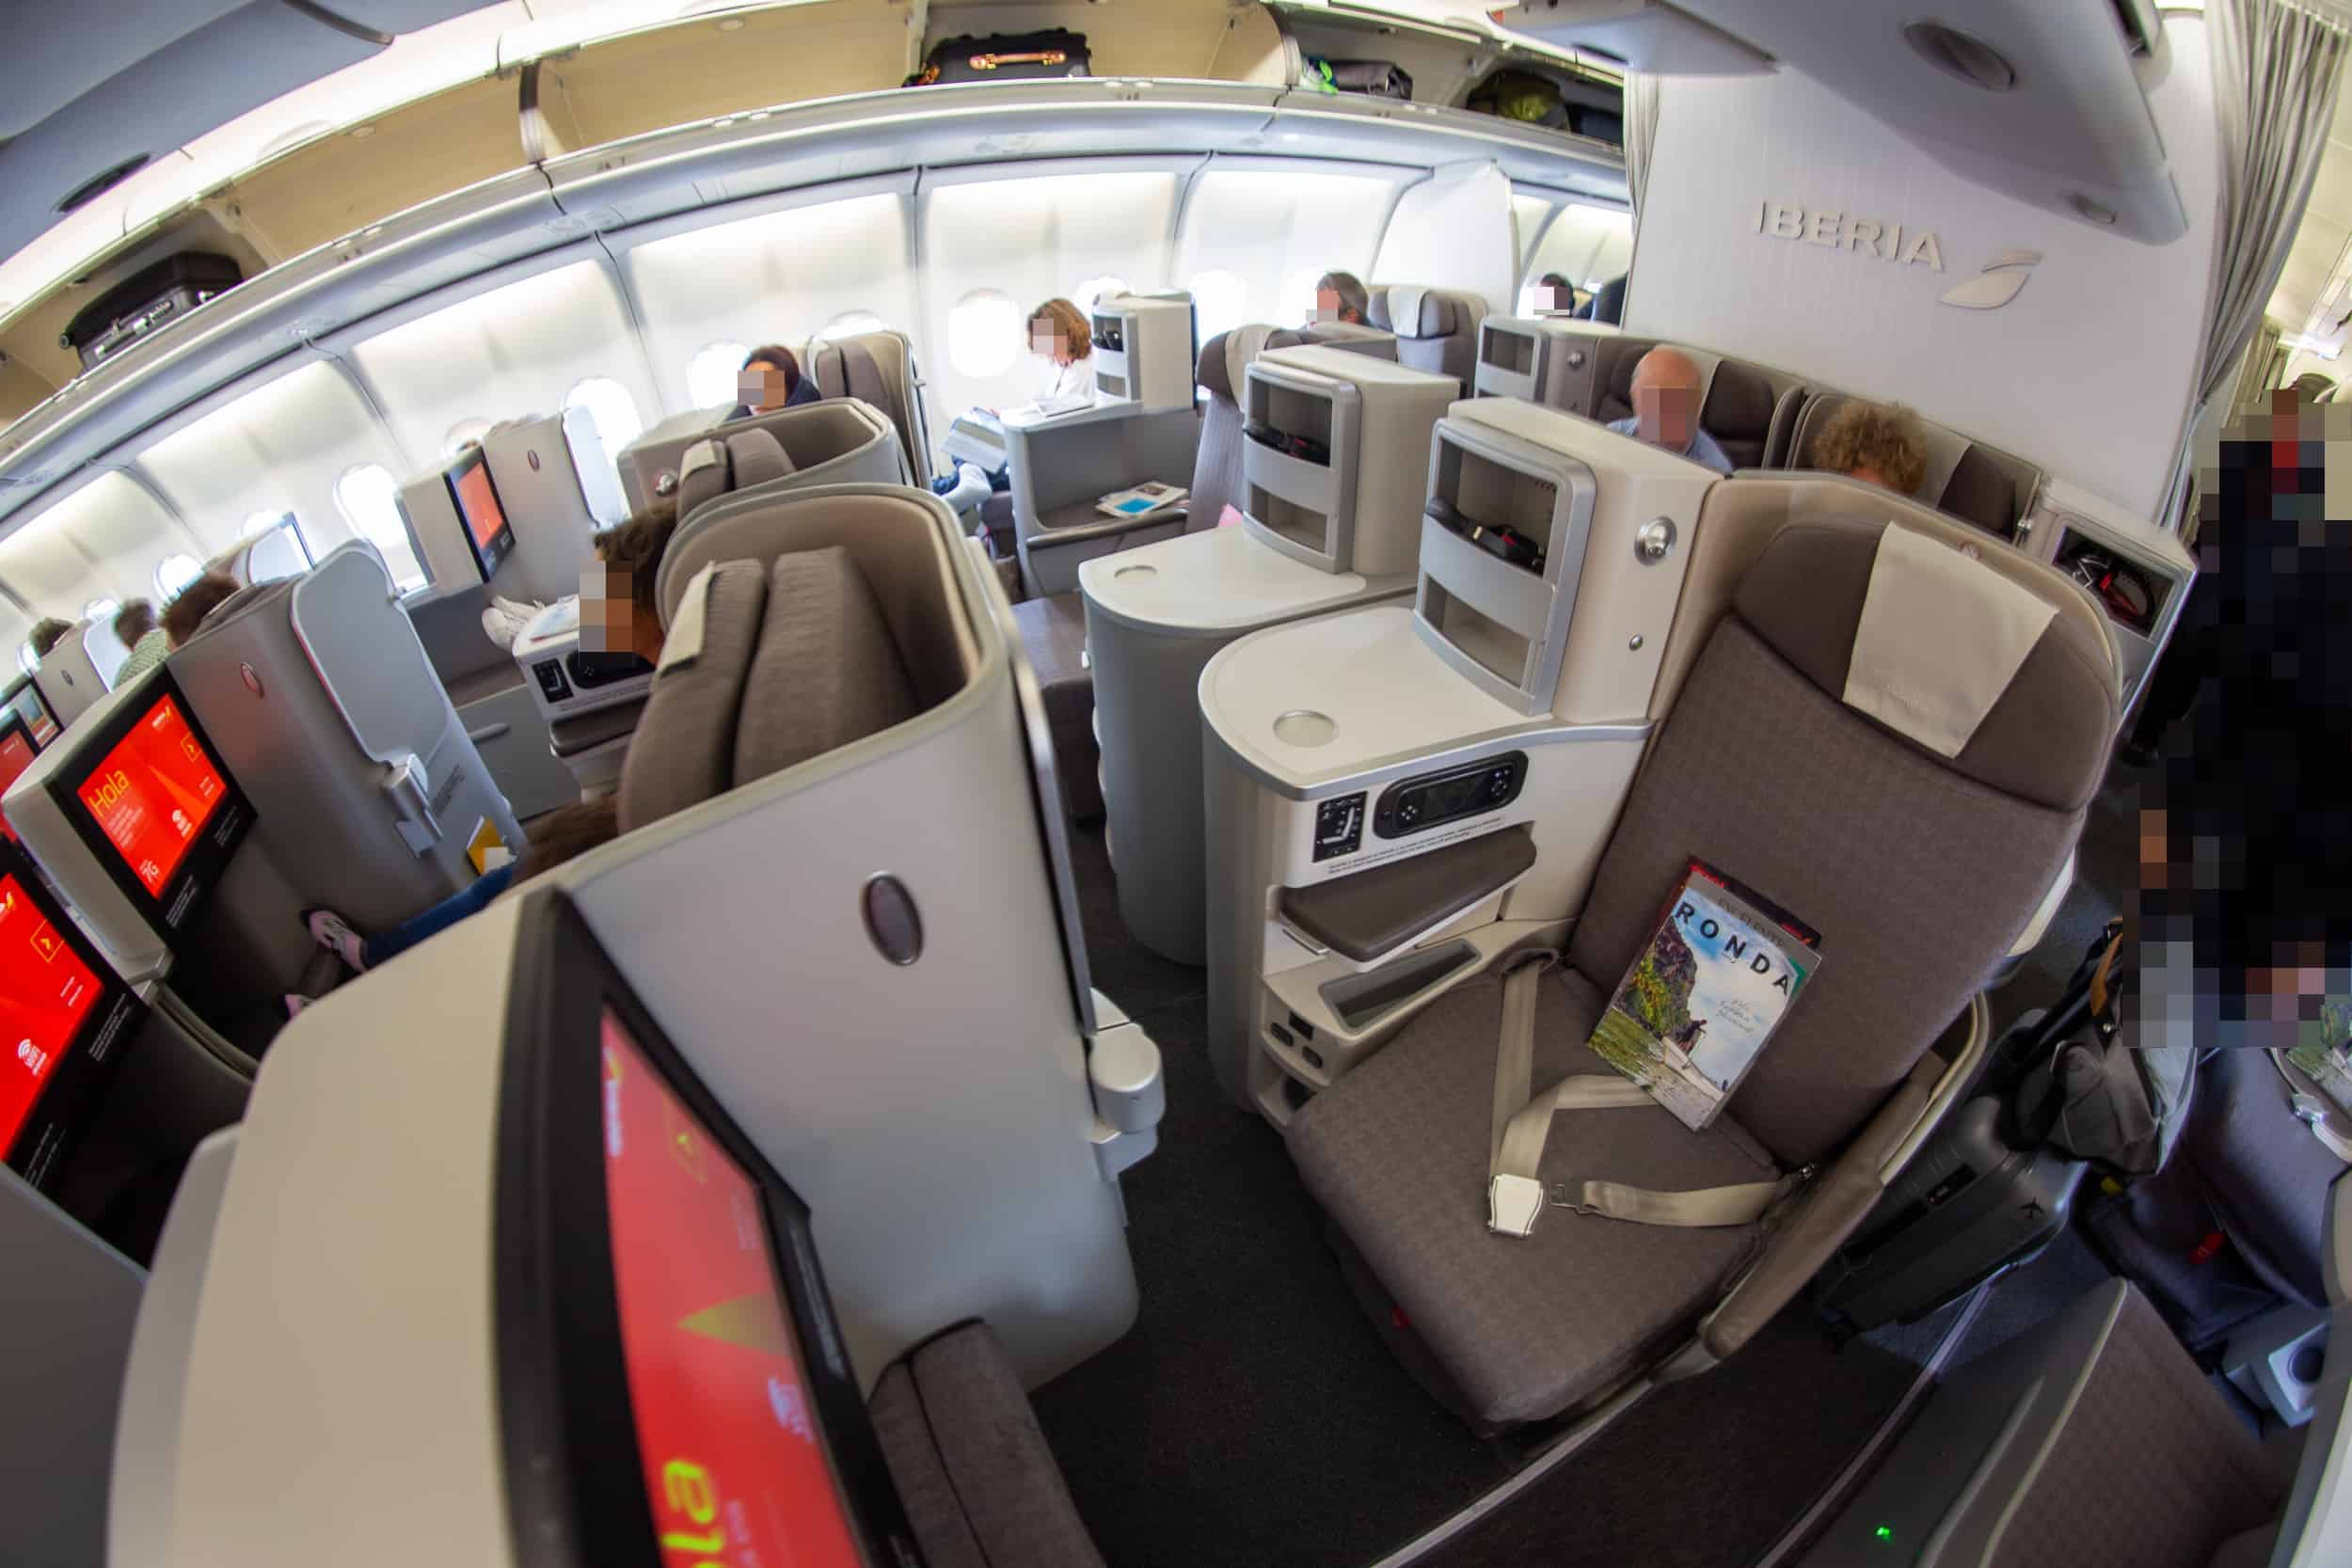 Review Iberia Business Class In An A340 600 From London To